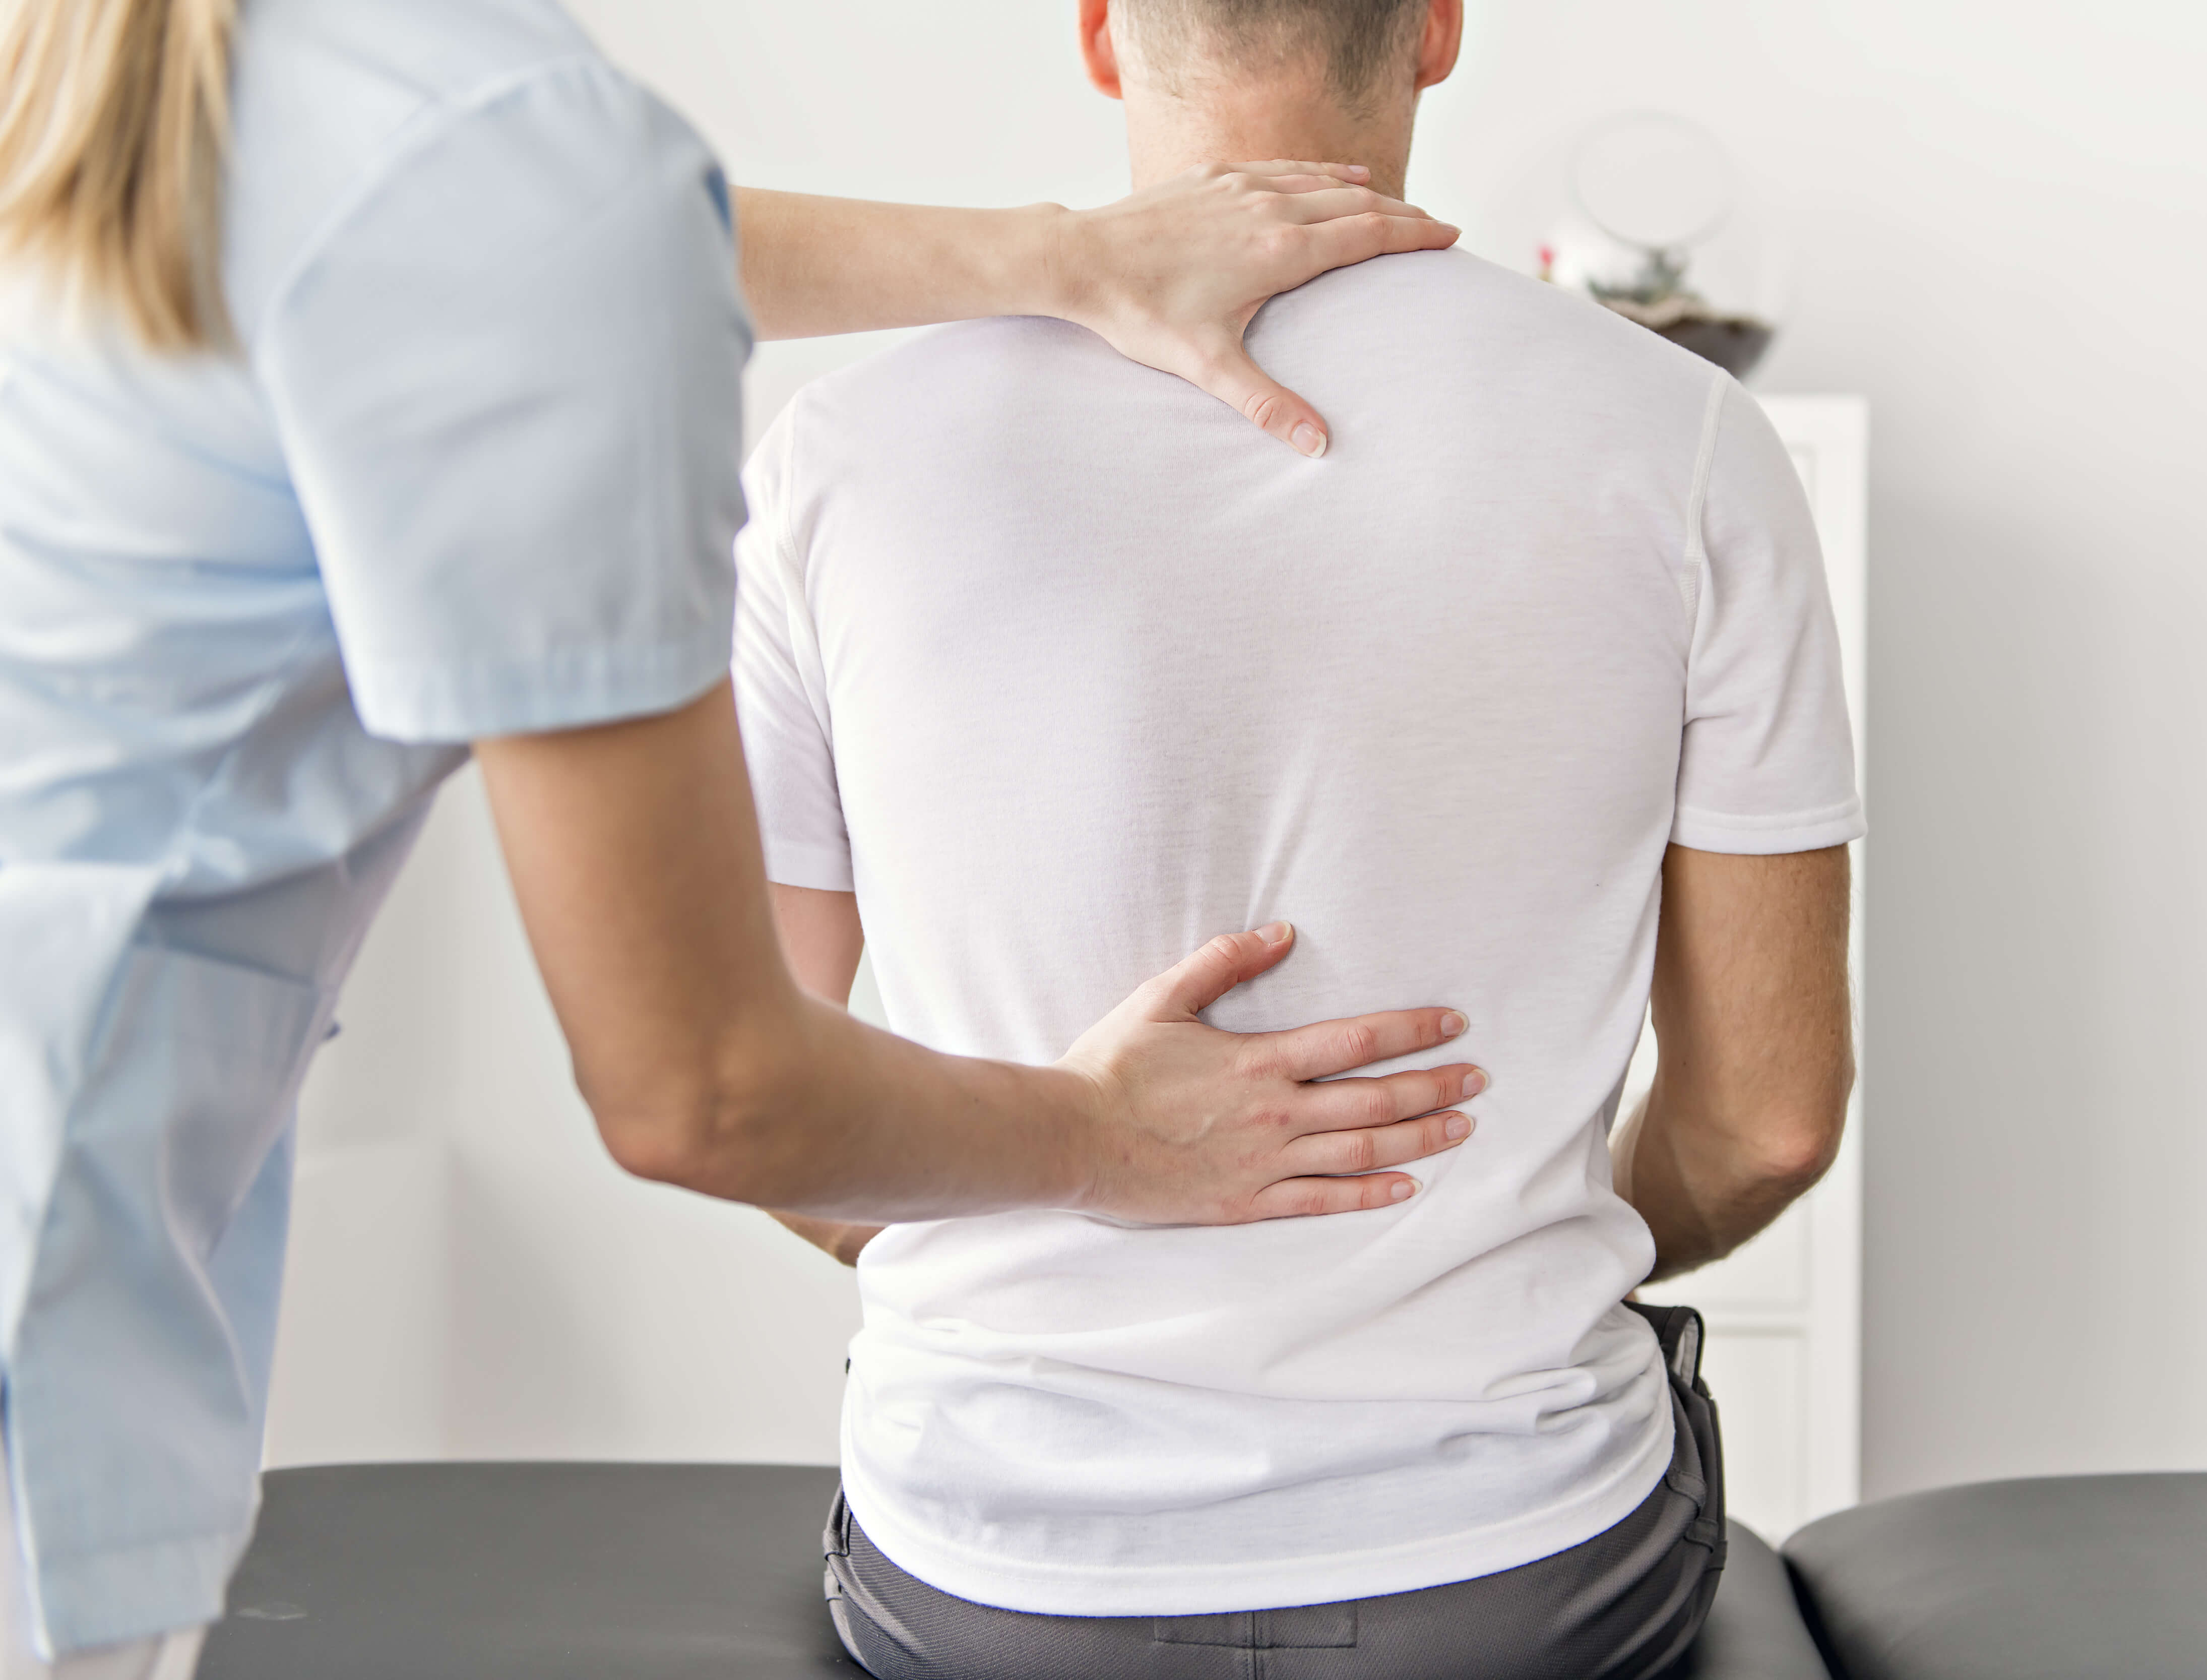 How to Find the Best Chiropractor?